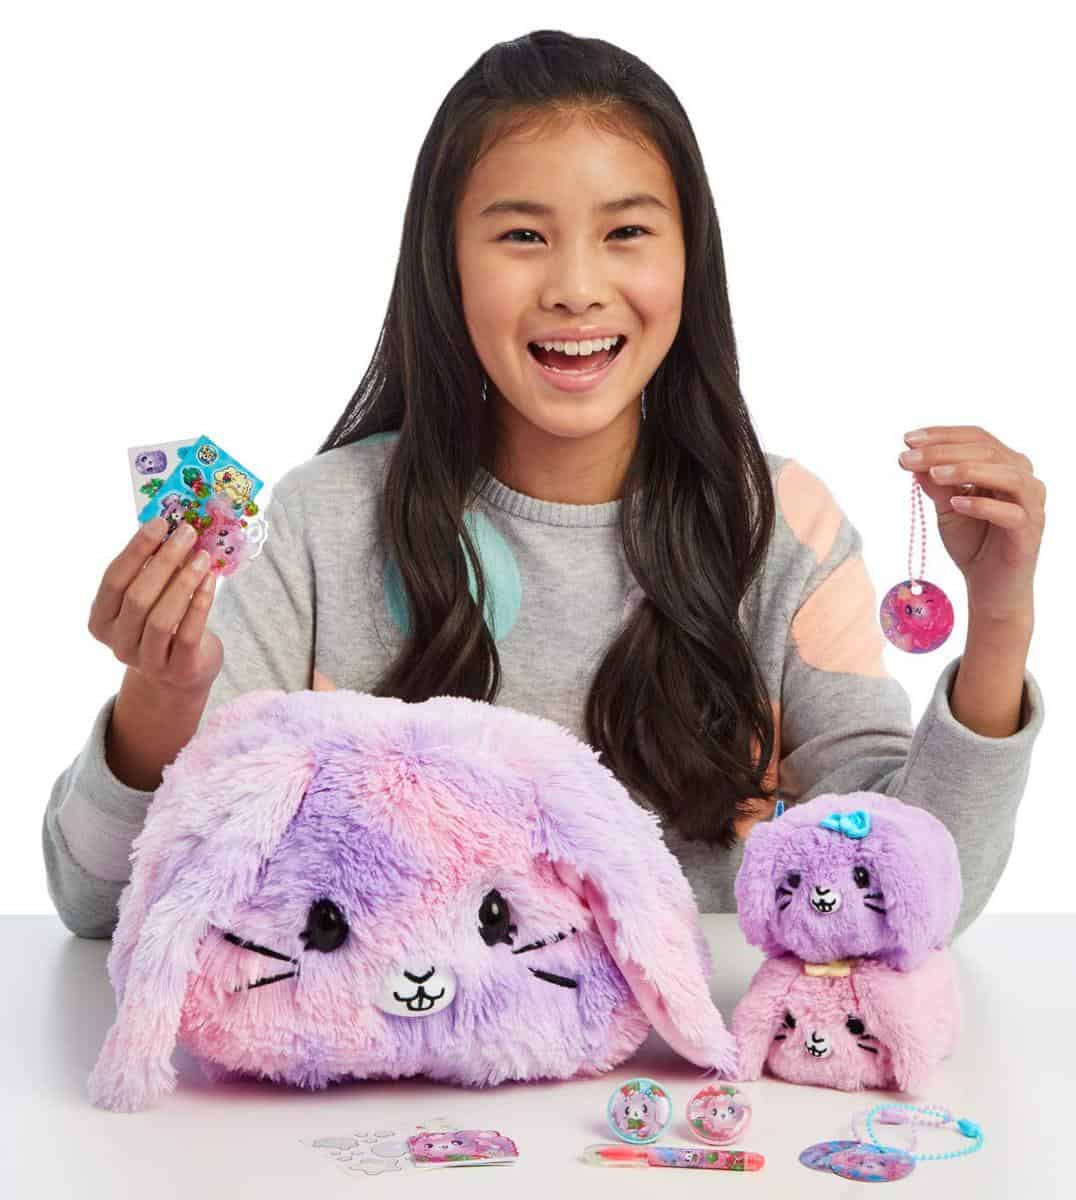 Pikmi Pops Giant Flips 2 Daily mom parents portal Gifts for Parents and Kids to Enjoy